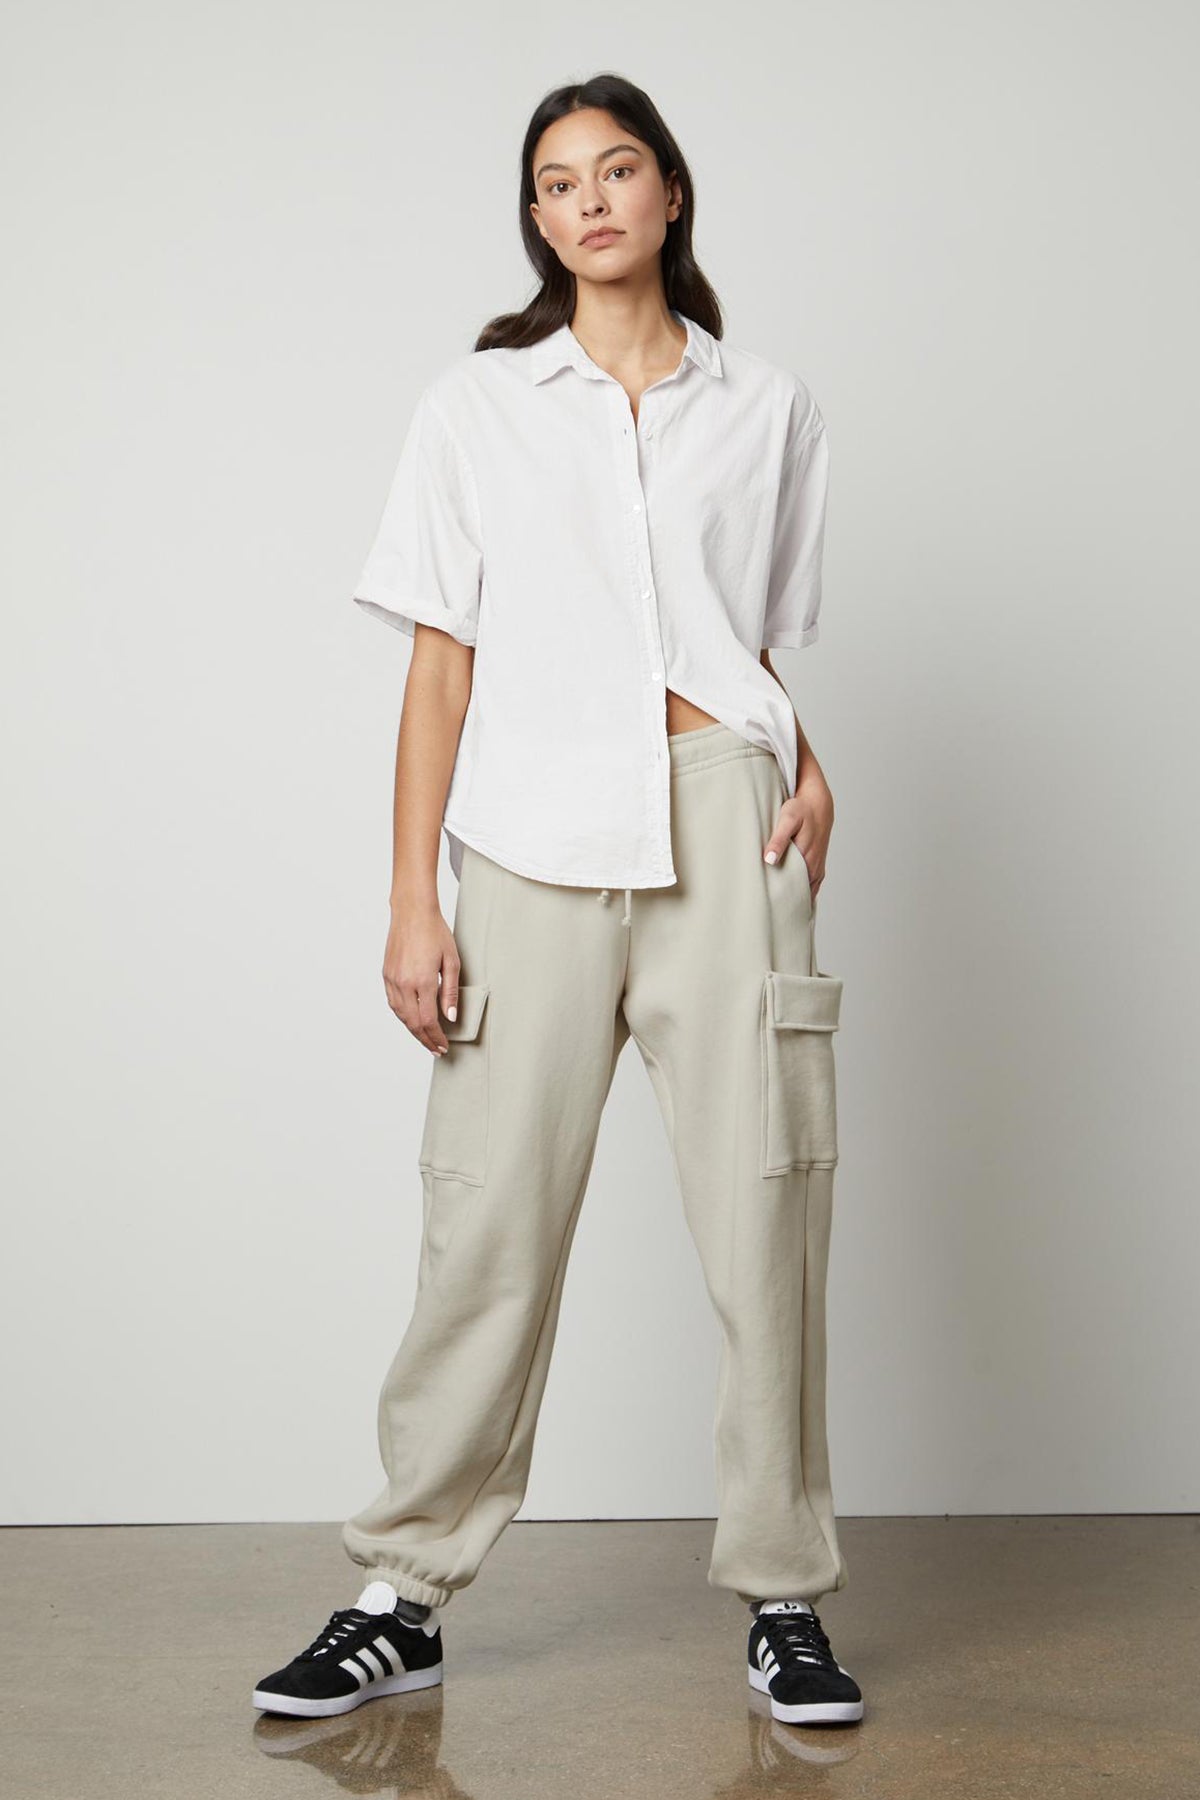 The model is wearing a white shirt and LUMI DRAWSTRING WAIST SWEATPANT cargo pants from Velvet by Graham & Spencer, perfect for everyday wear or running errands.-35660369363137